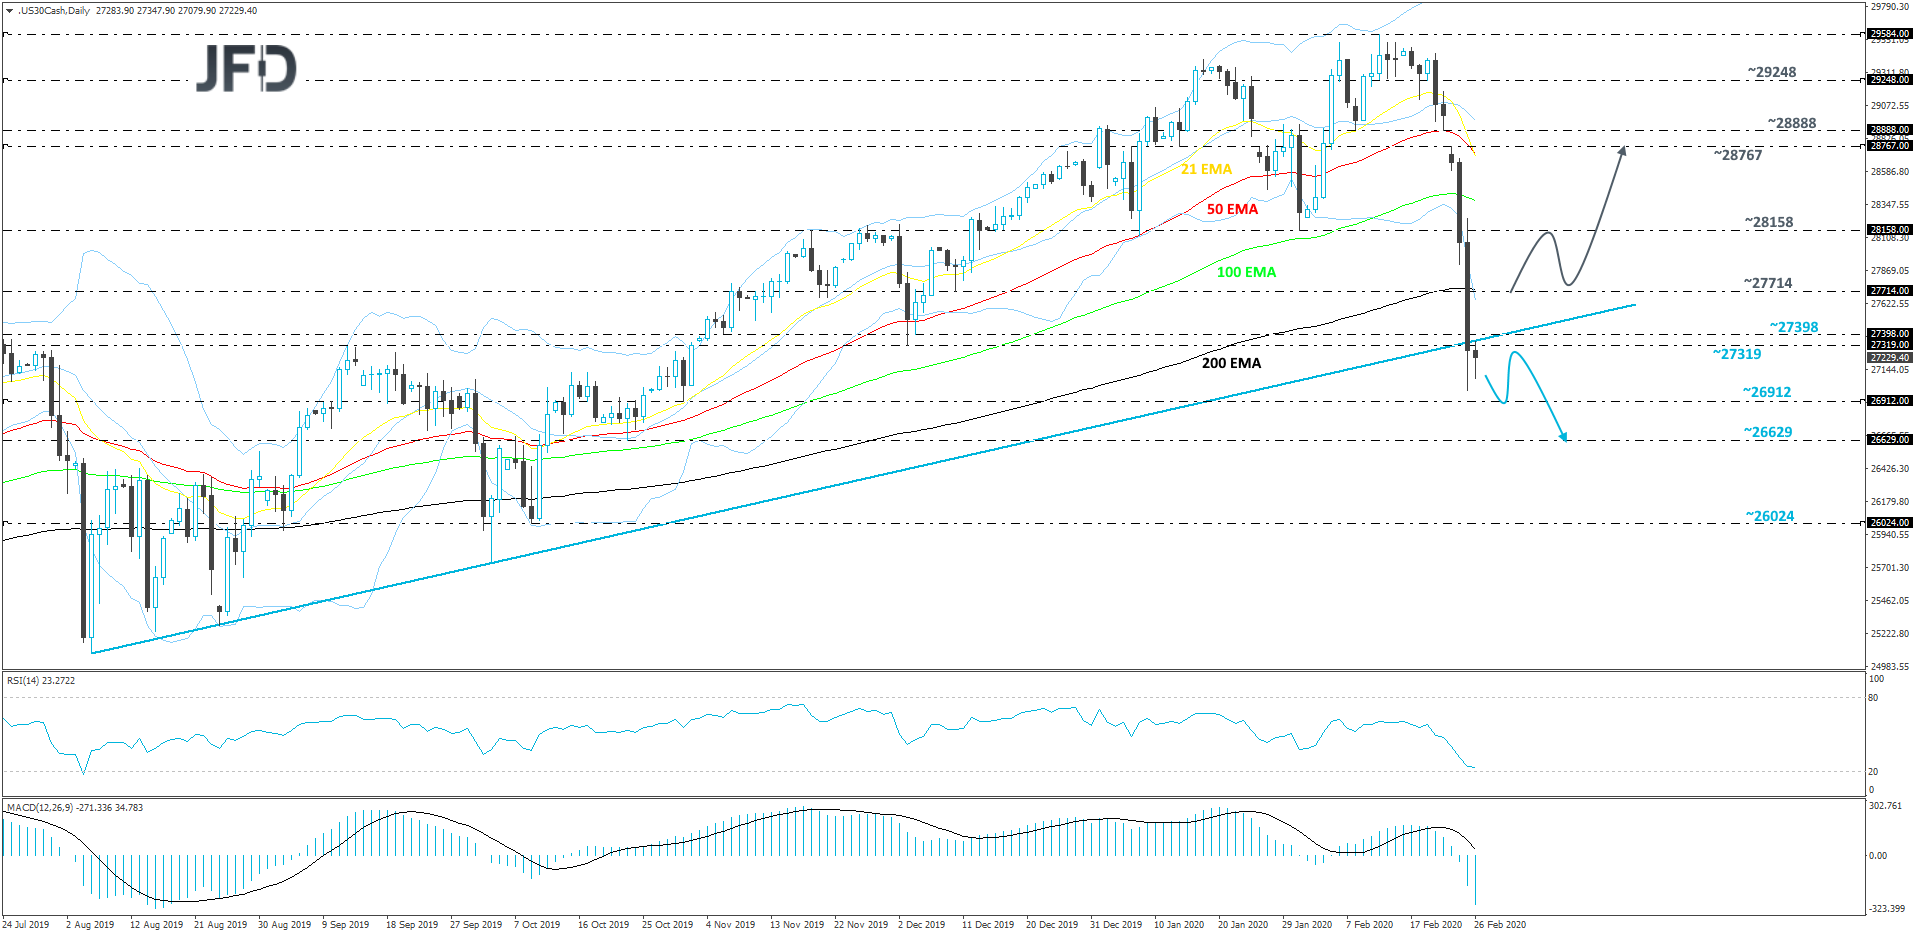 Dow Jones Industrial Average daily chart technical analysis